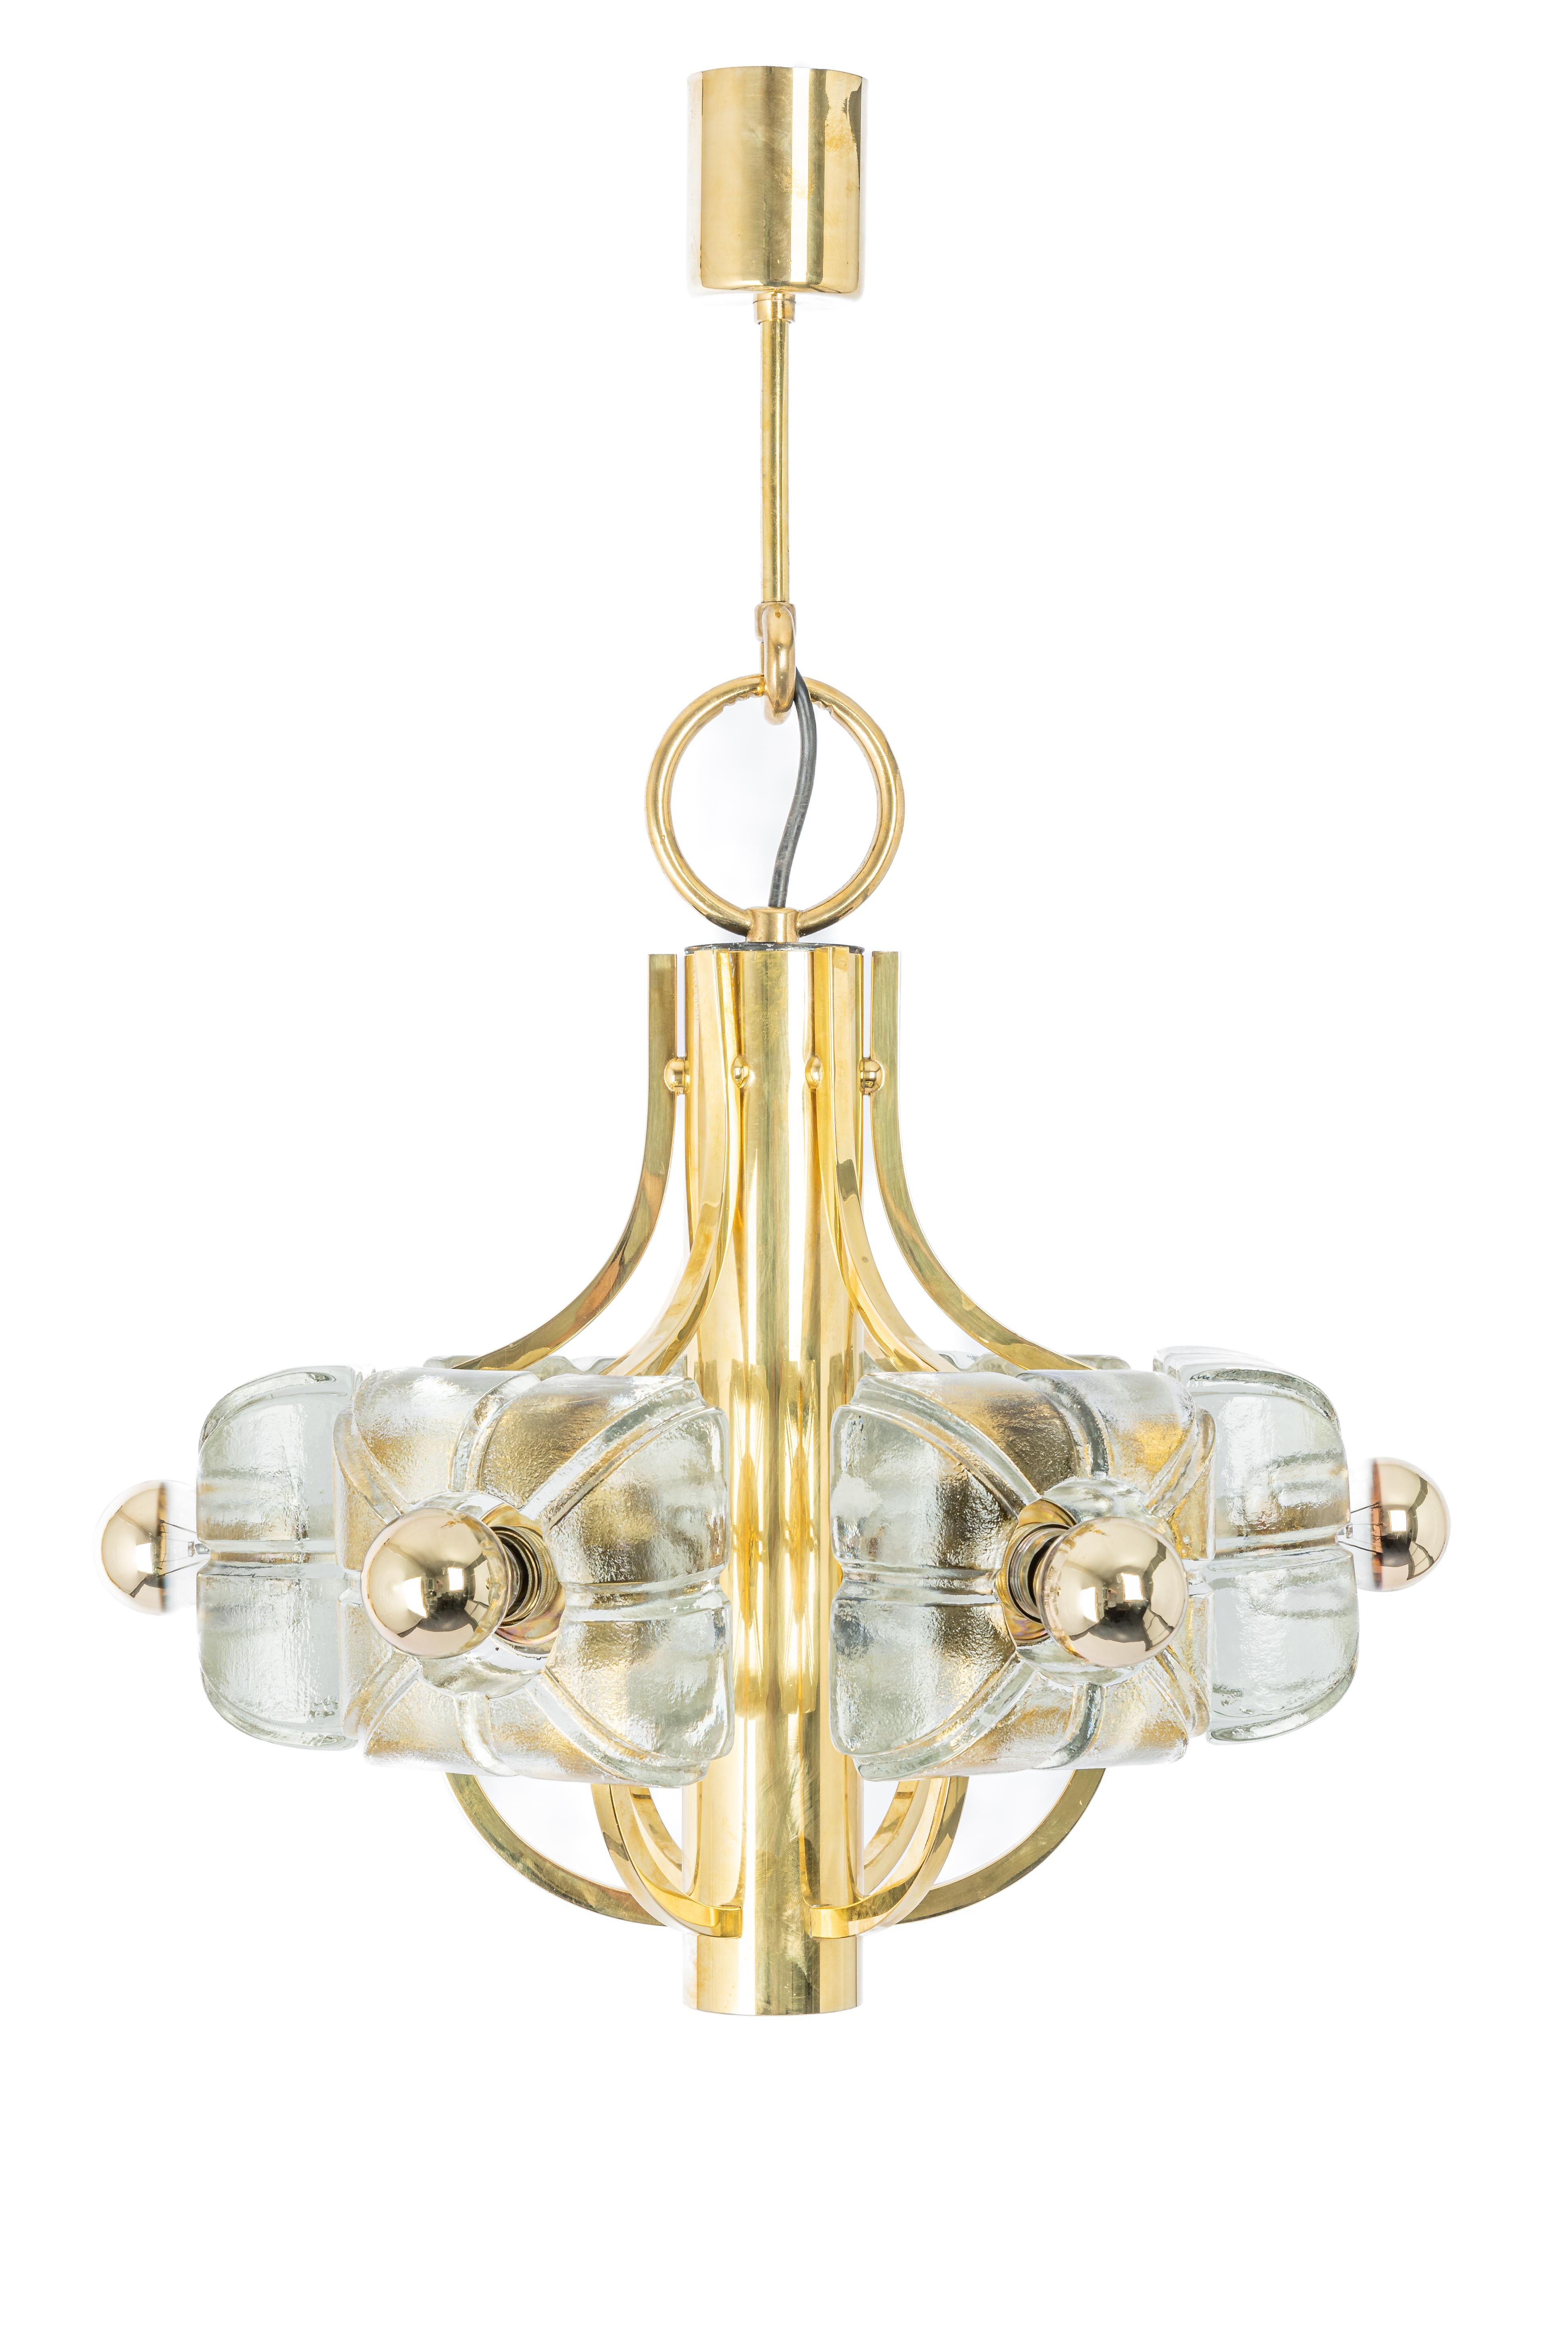 A wonderful large and high-quality gilded chandelier/pendant light fixture by Sische, Germany, 1970s

It is made of a brass frame decorated with 6 crystal glasses.
The lamp takes 6 small base bulbs (max. 40W per bulb).
Light bulbs are not